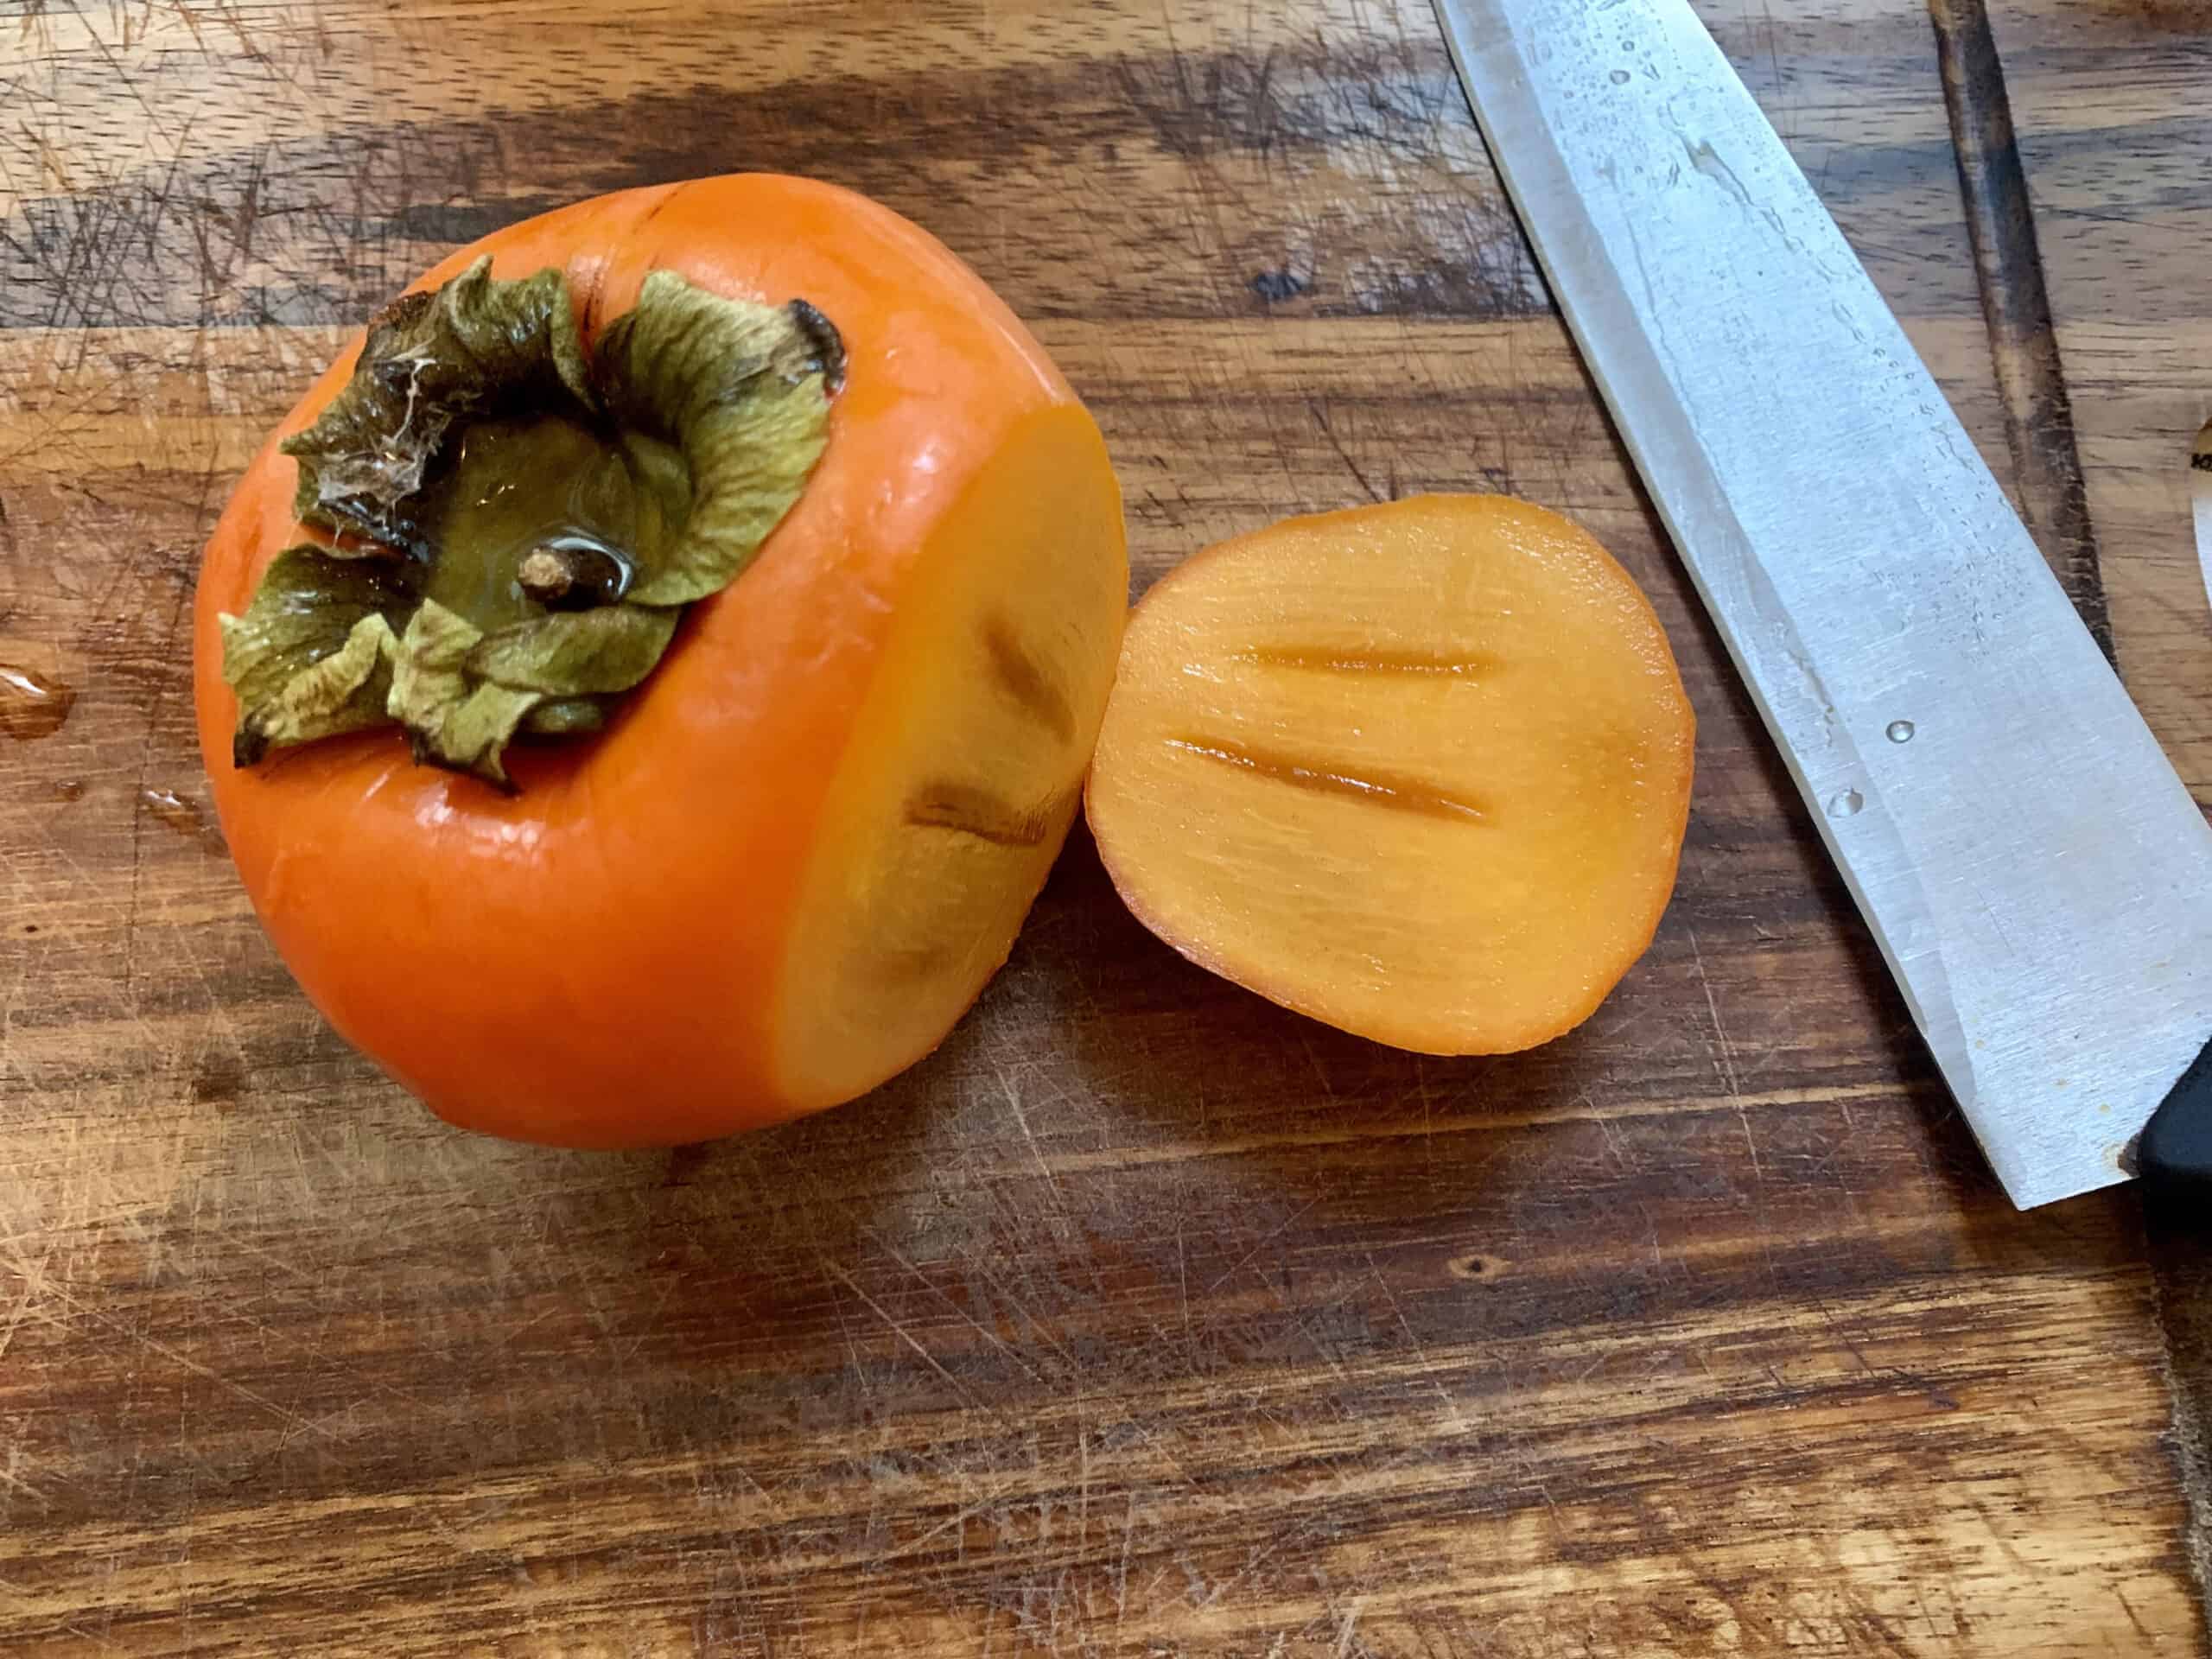 Persimmon is a delicious fruit found in Greece.